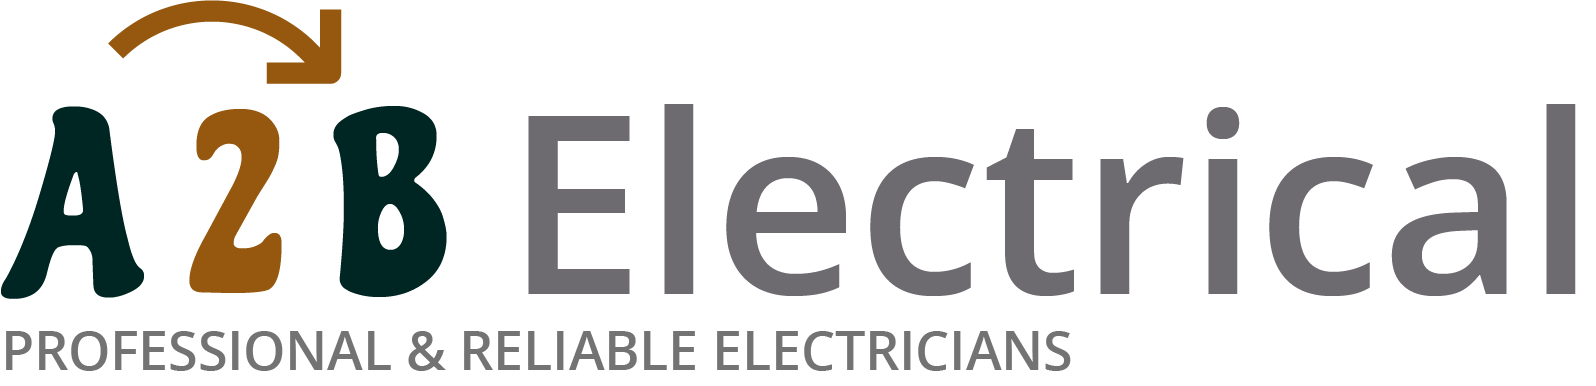 If you have electrical wiring problems in Holborn, we can provide an electrician to have a look for you. 